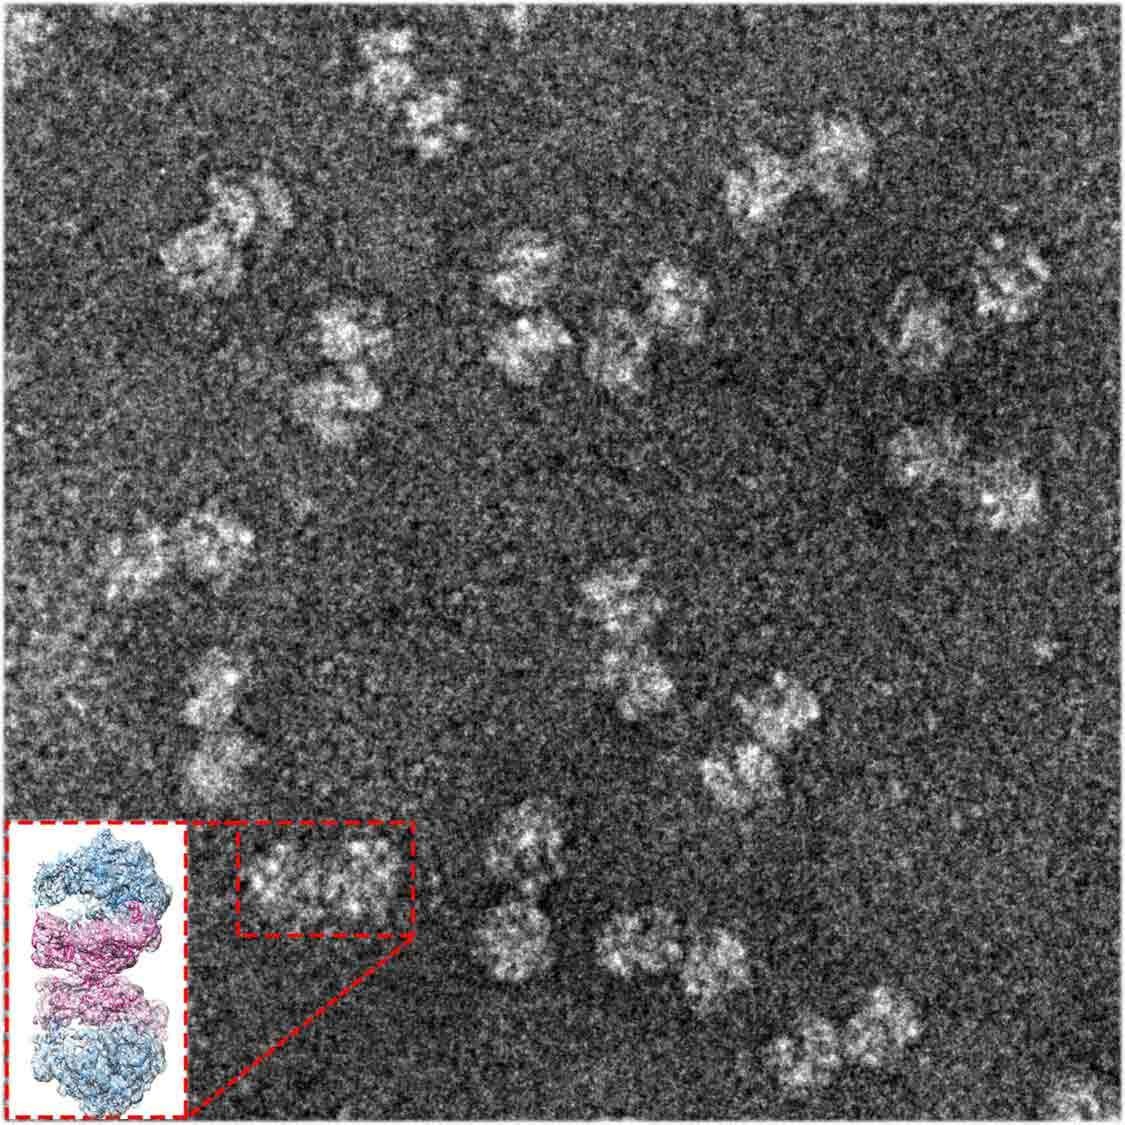 Electron microscope image of paired ribosomes taken from gram-negative bacteria